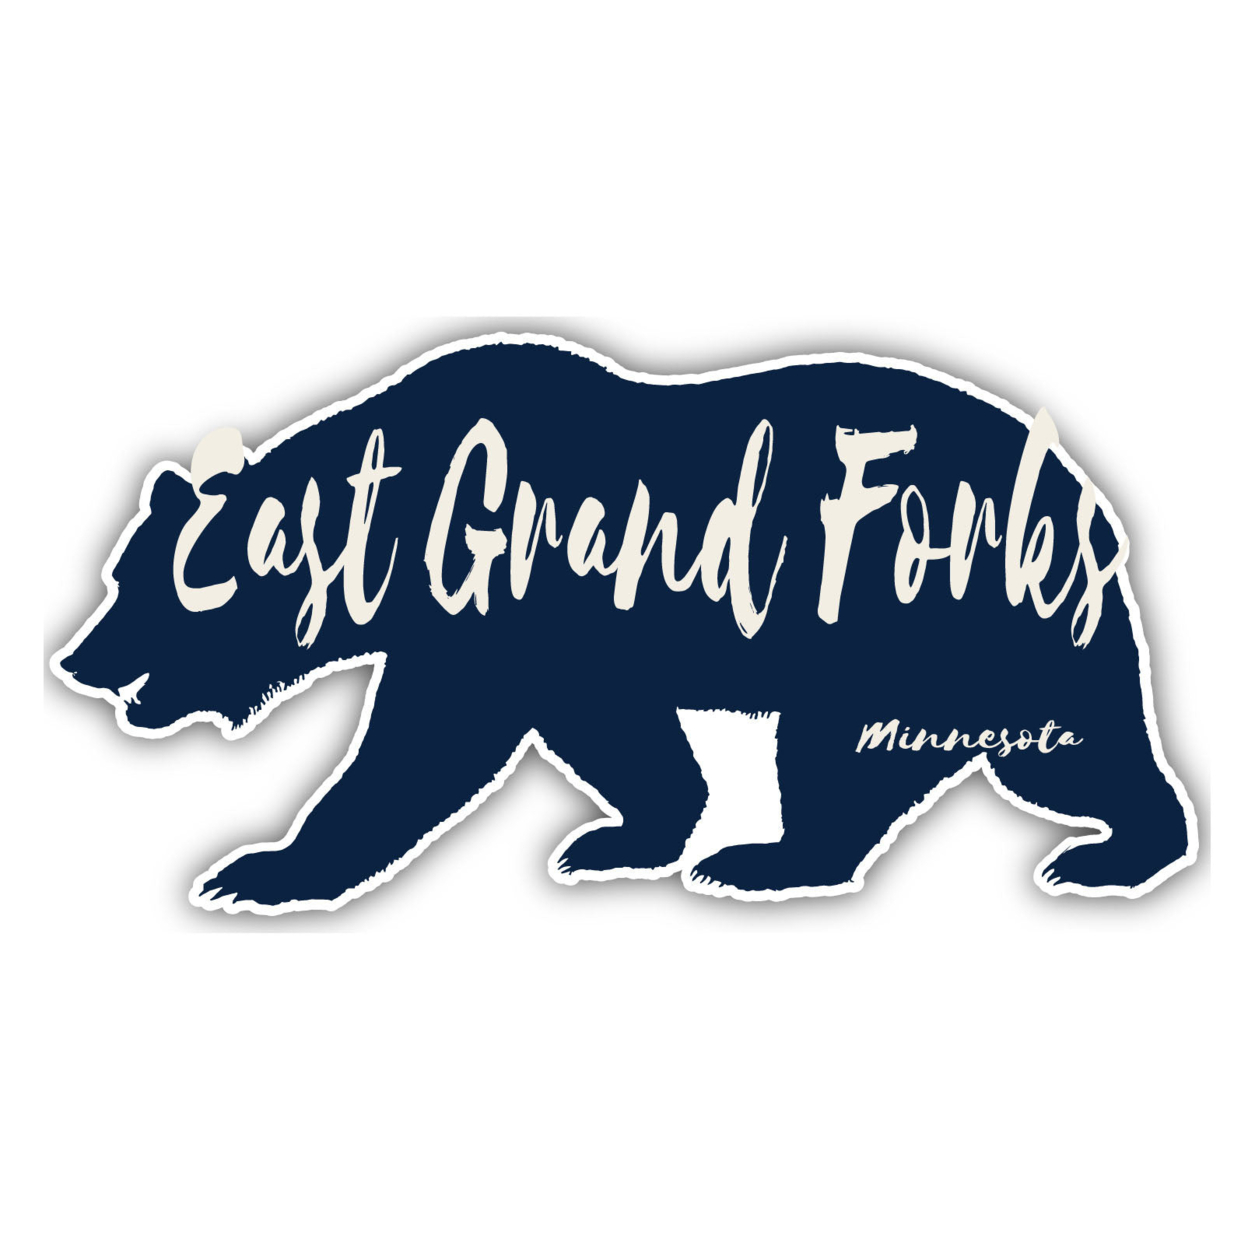 East Grand Forks Minnesota Souvenir Decorative Stickers (Choose Theme And Size) - 4-Pack, 6-Inch, Tent